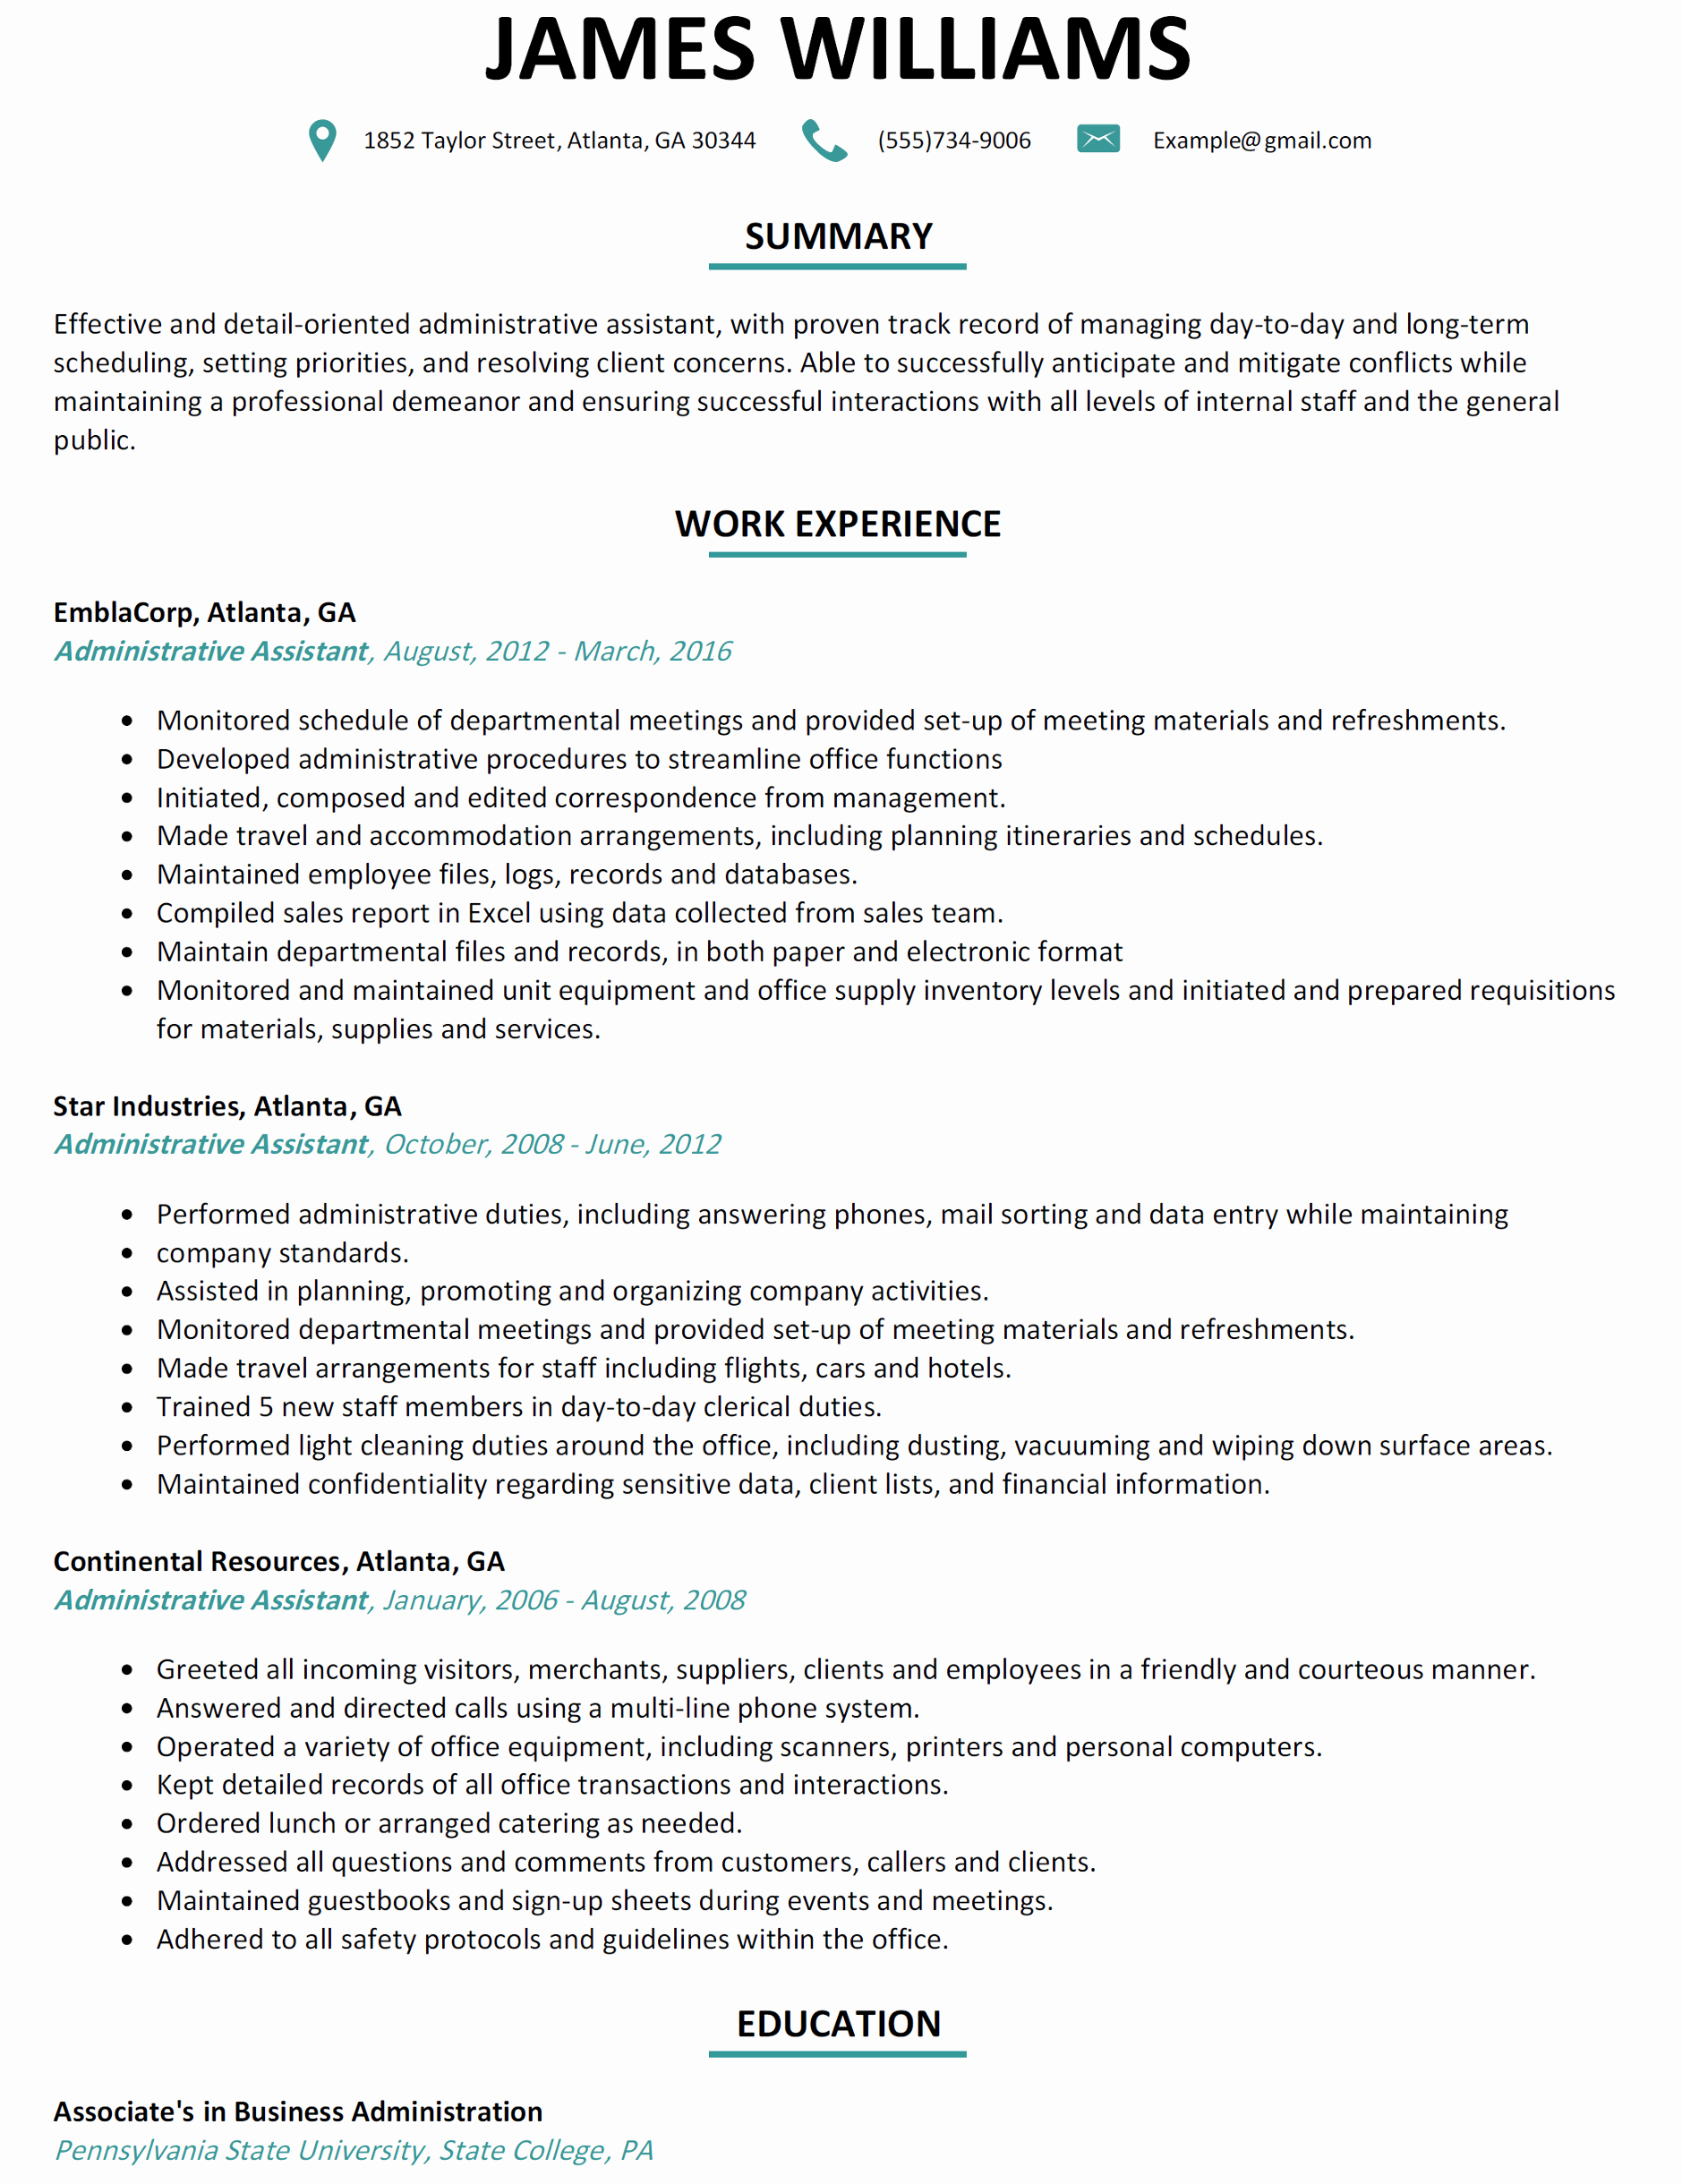 Professional Resume for Administrative assistant